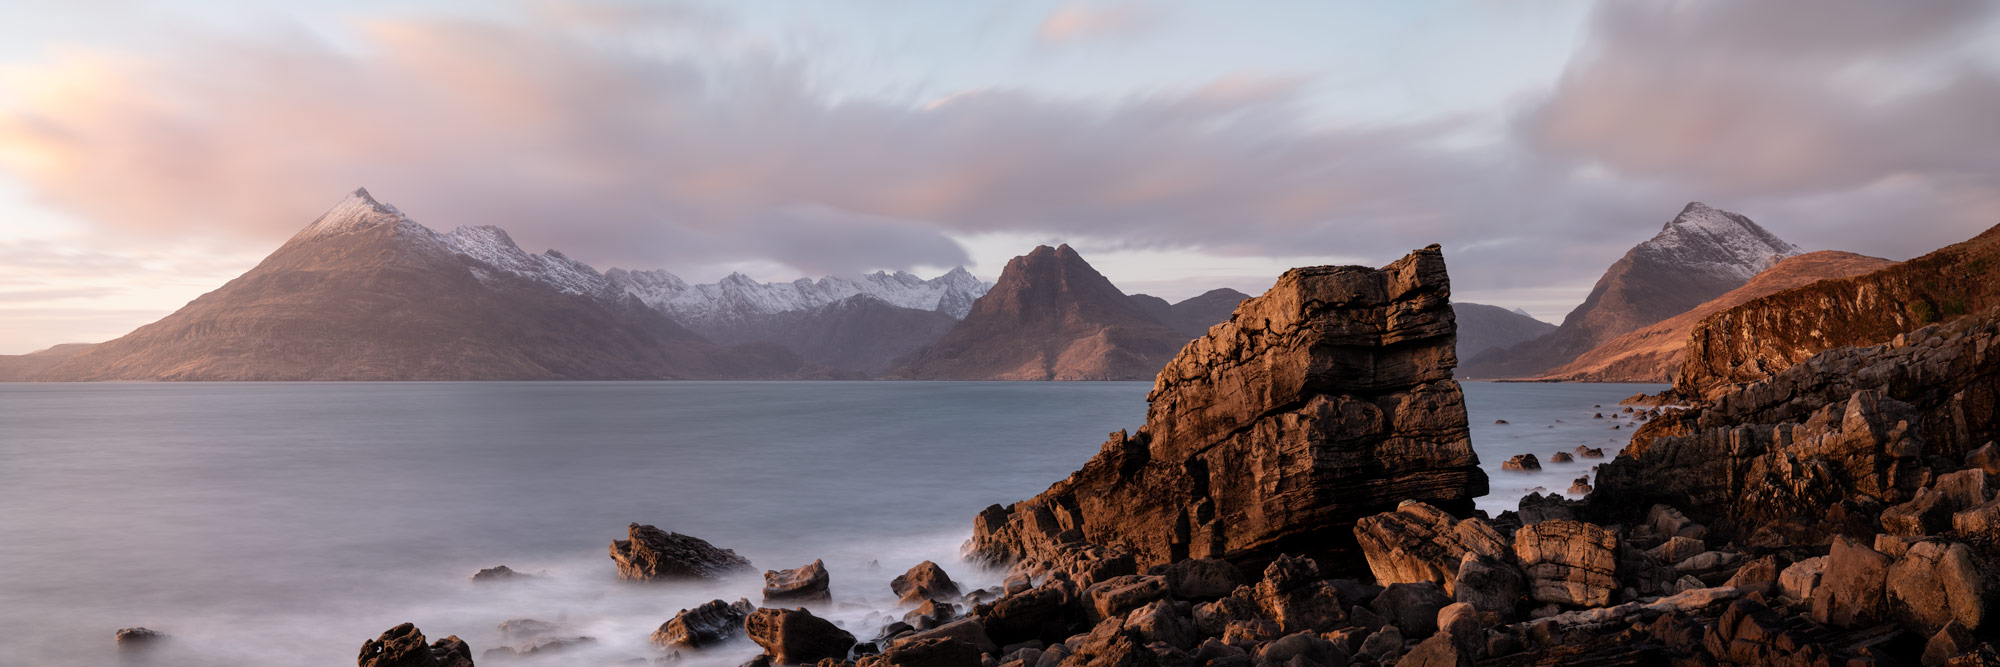 Panorama of the Elgol Coast and Cuillin mountains at sunset on the Isle of Skye